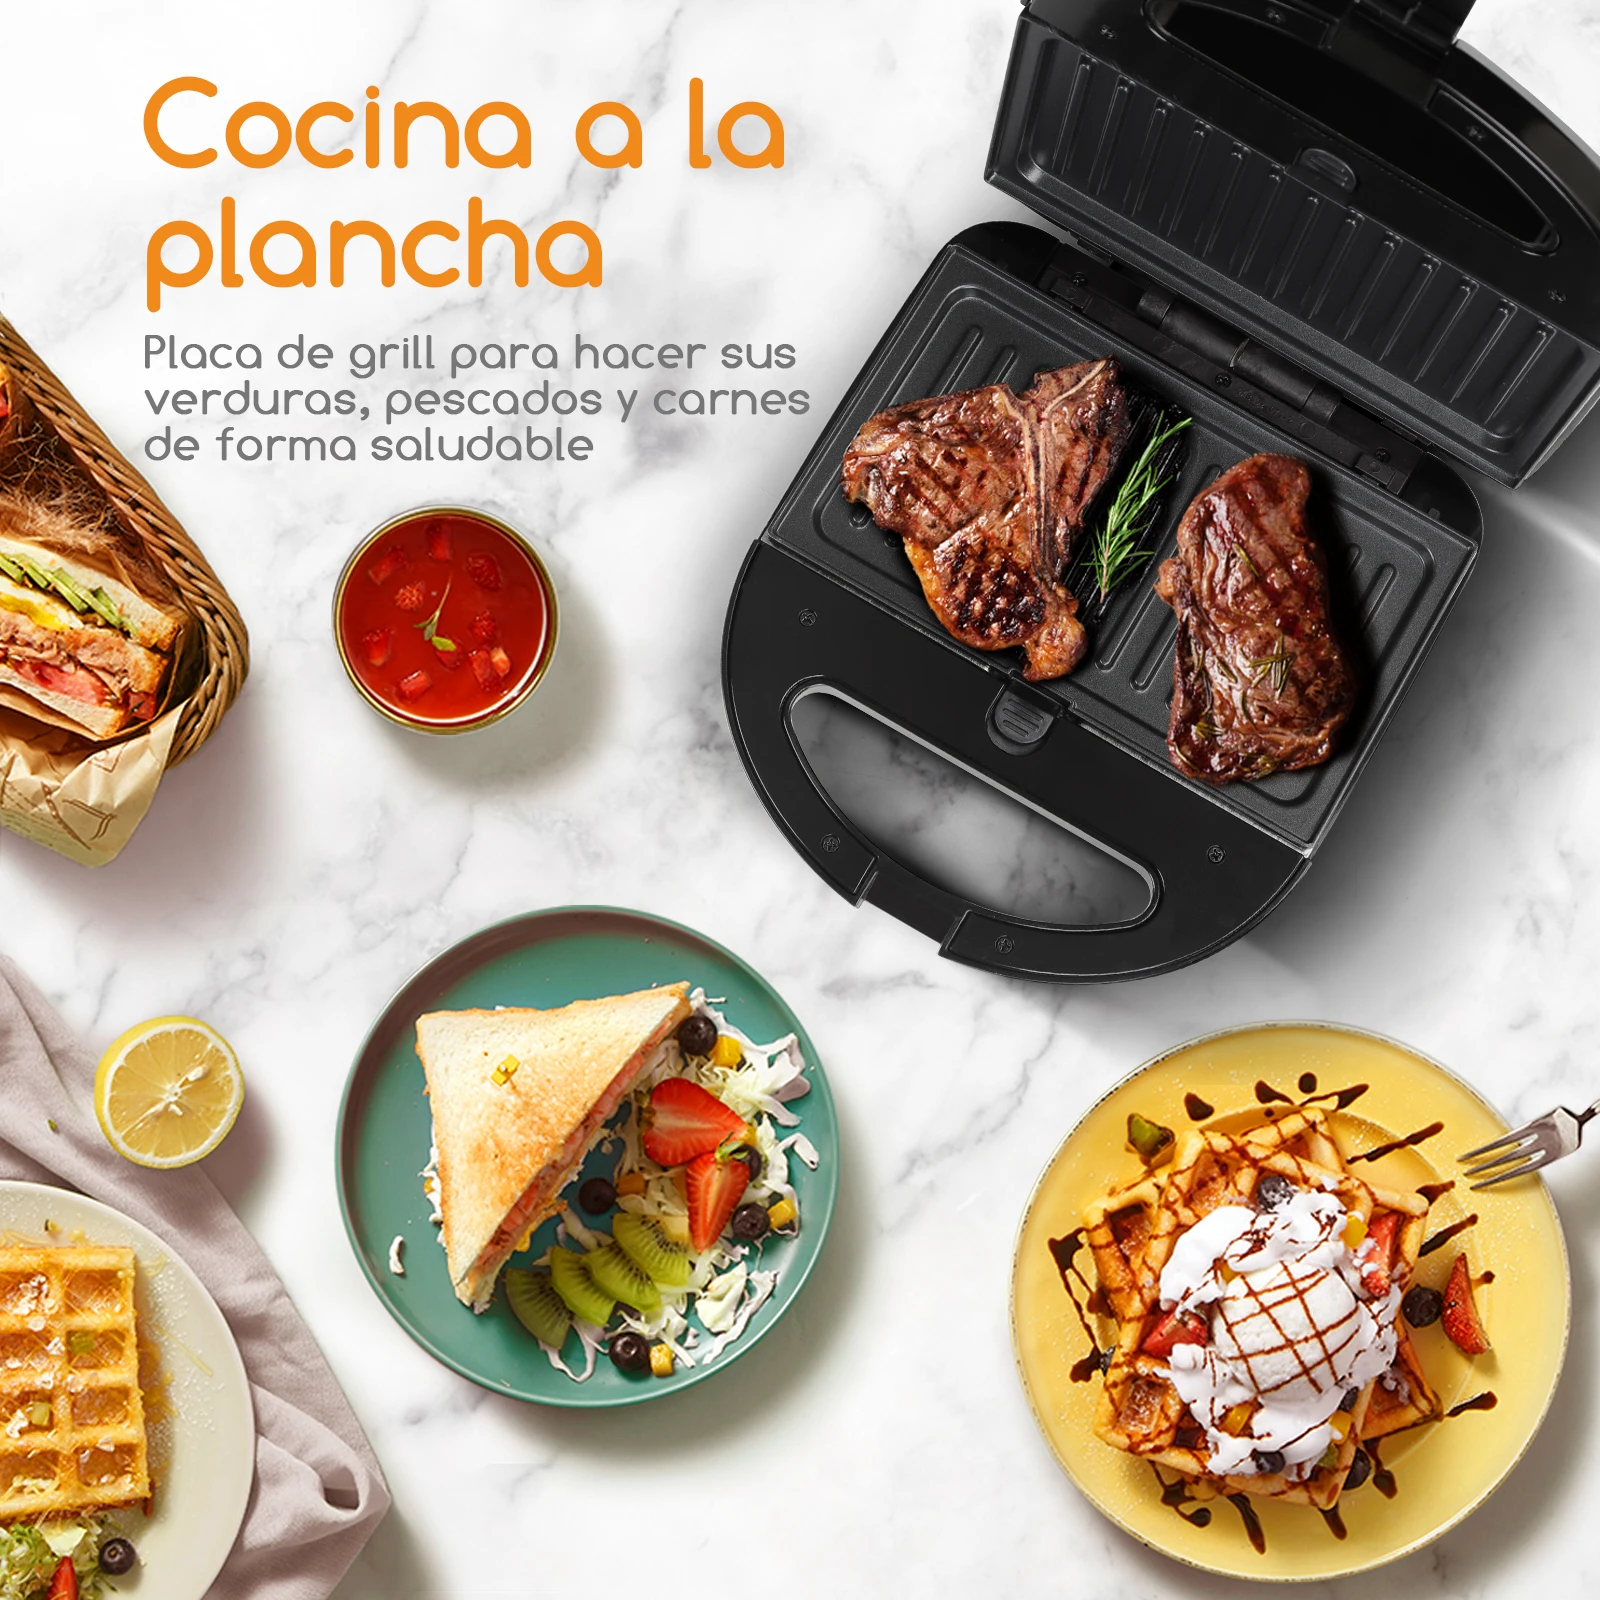 https://ae01.alicdn.com/kf/S55882c799d764cea982b86c384bc3a28I/3-in-1-sandwich-maker-electric-sandwich-maker-Grill-and-waffle-3-detachable-non-stick-and.jpg